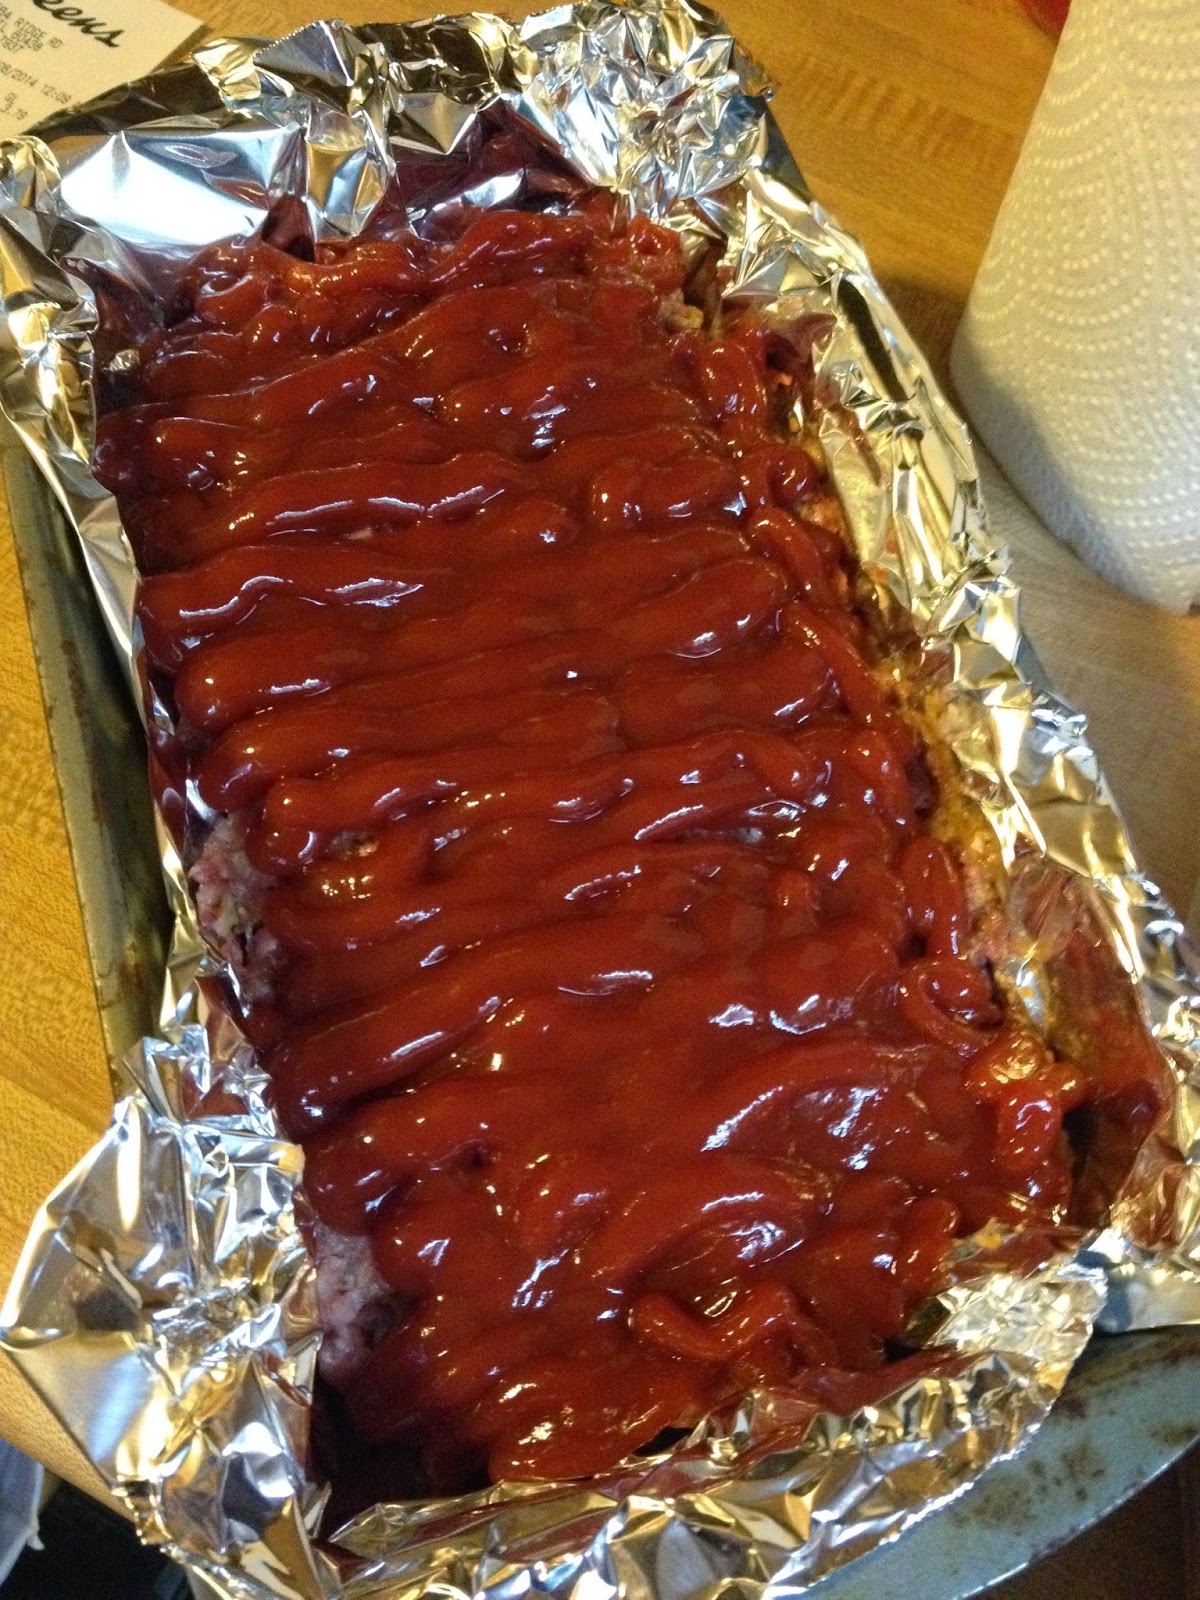 How Long To Cook A Meatloaf At 400 Degrees : Easy Turkey Meatloaf Moist Spend With Pennies ...